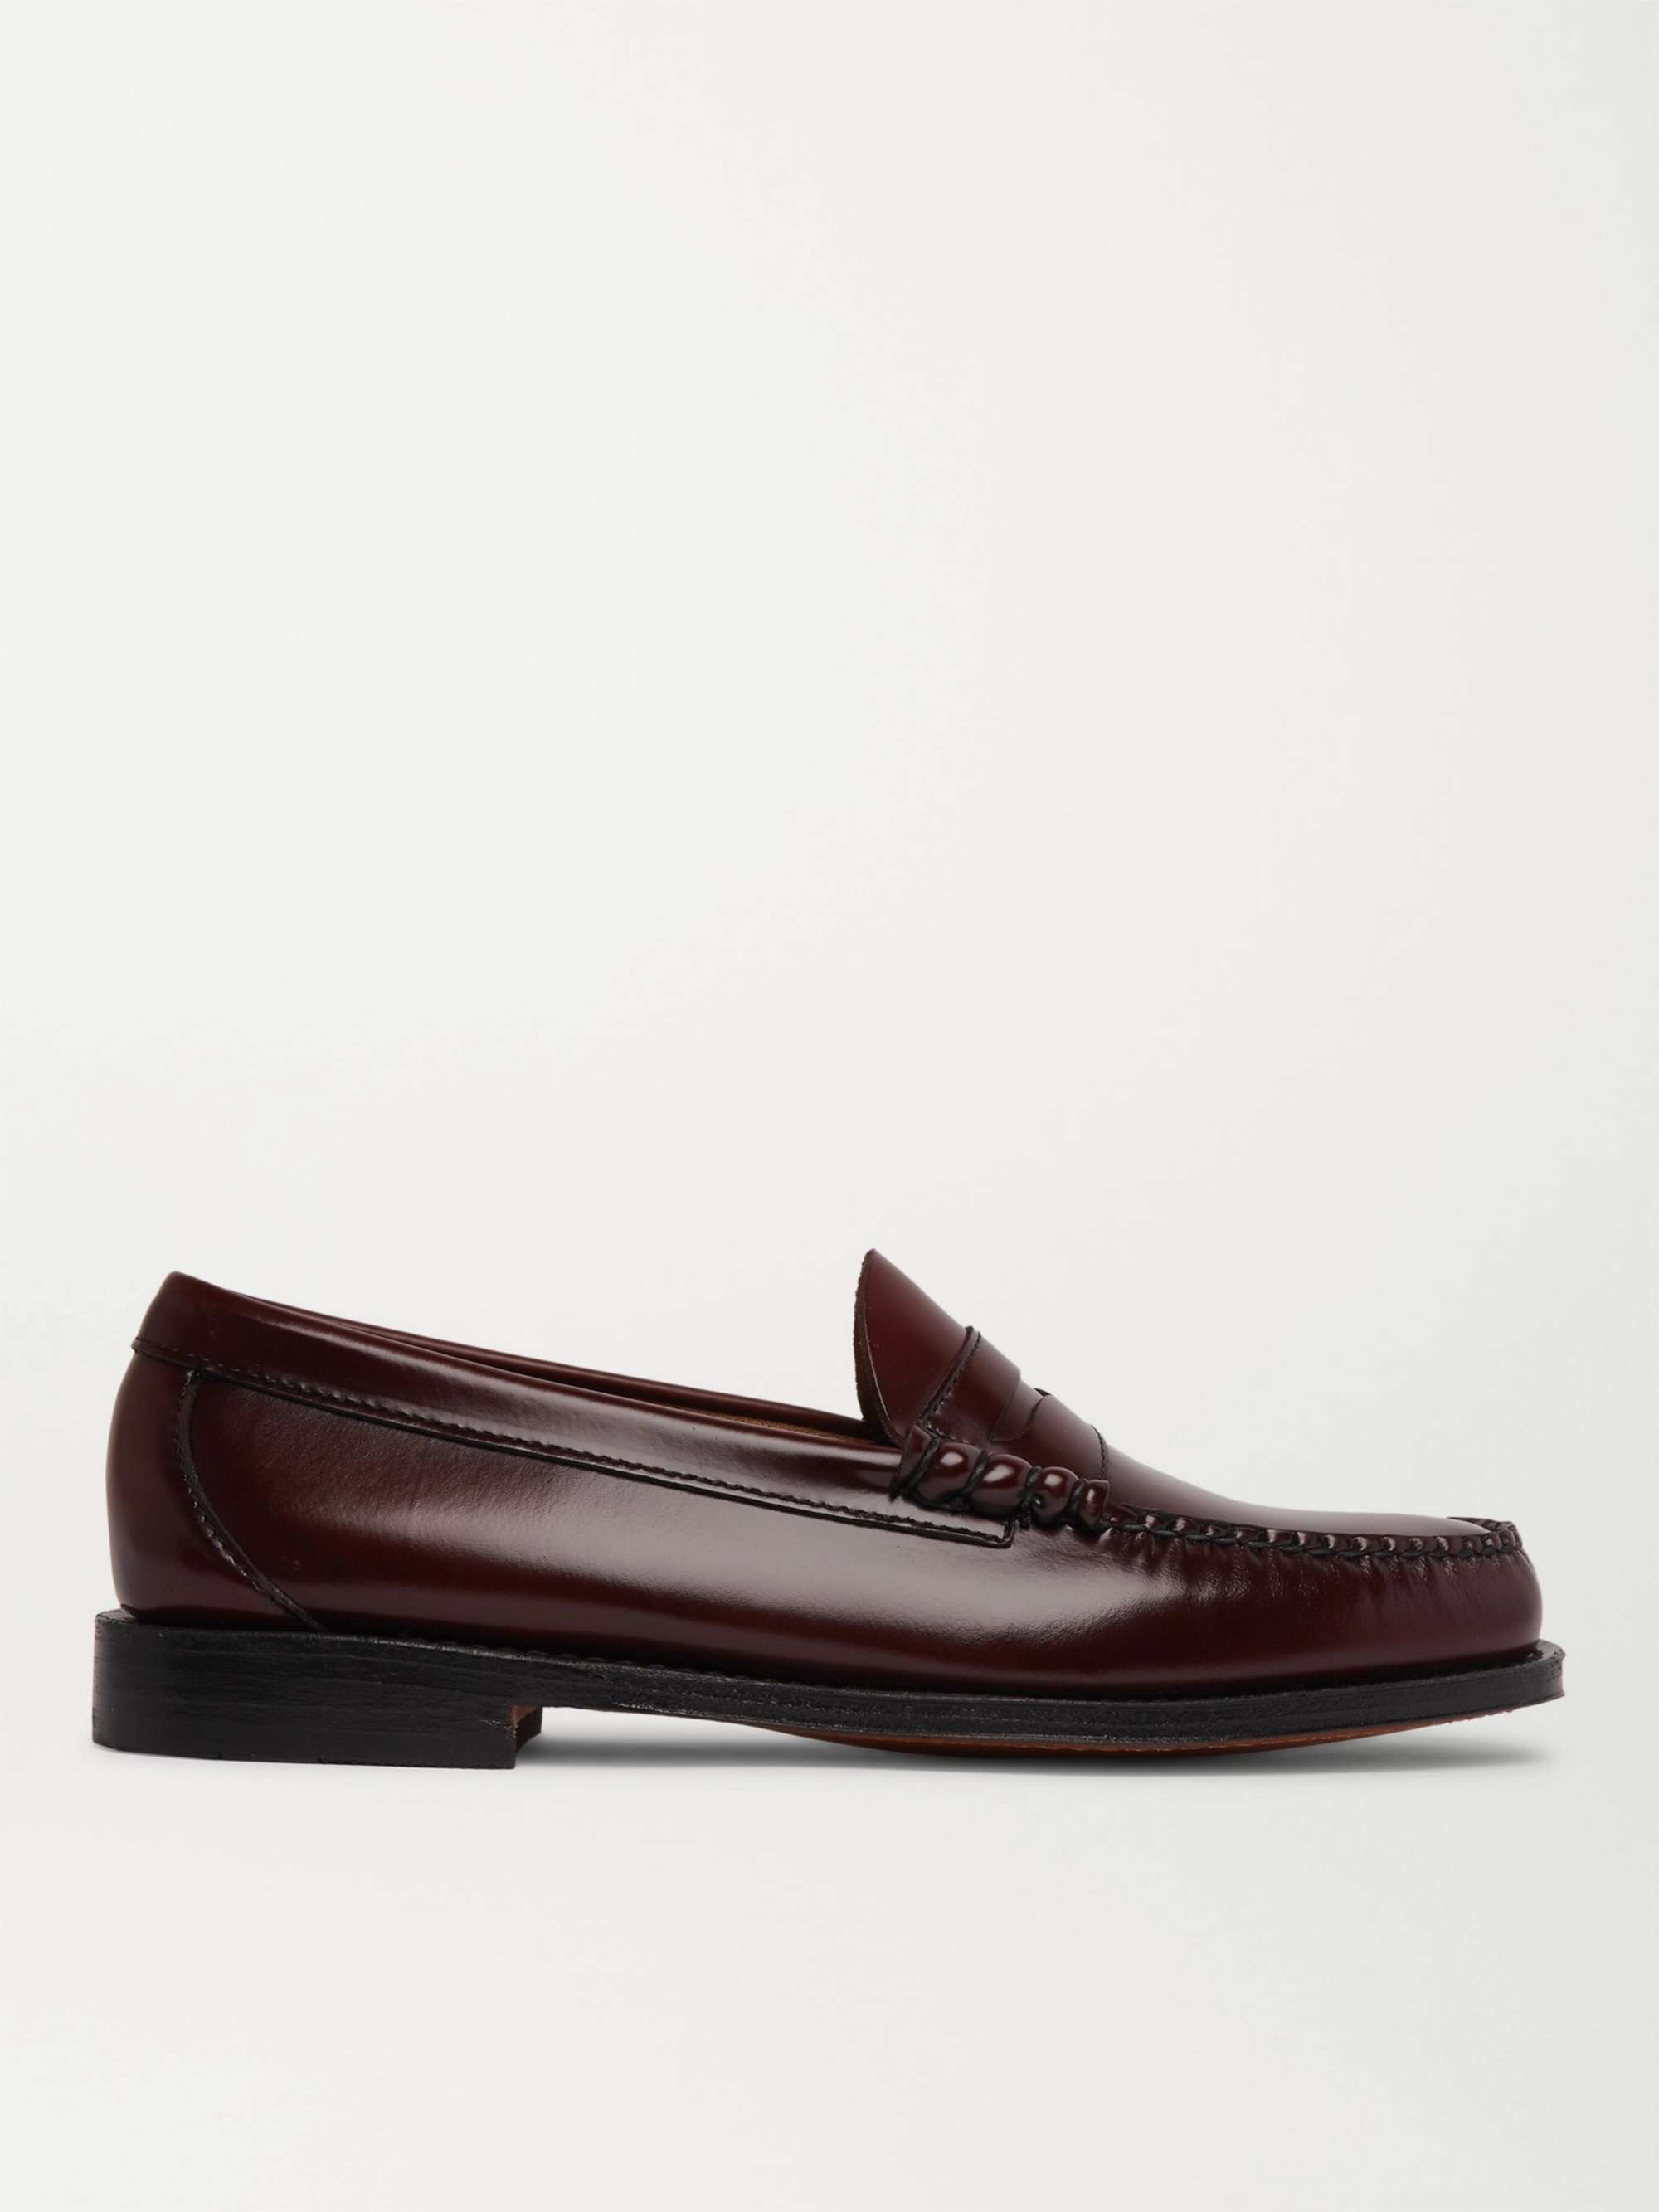 G.H. BASS & CO. Weejuns Heritage Larson Leather Penny Loafers for Men | MR  PORTER